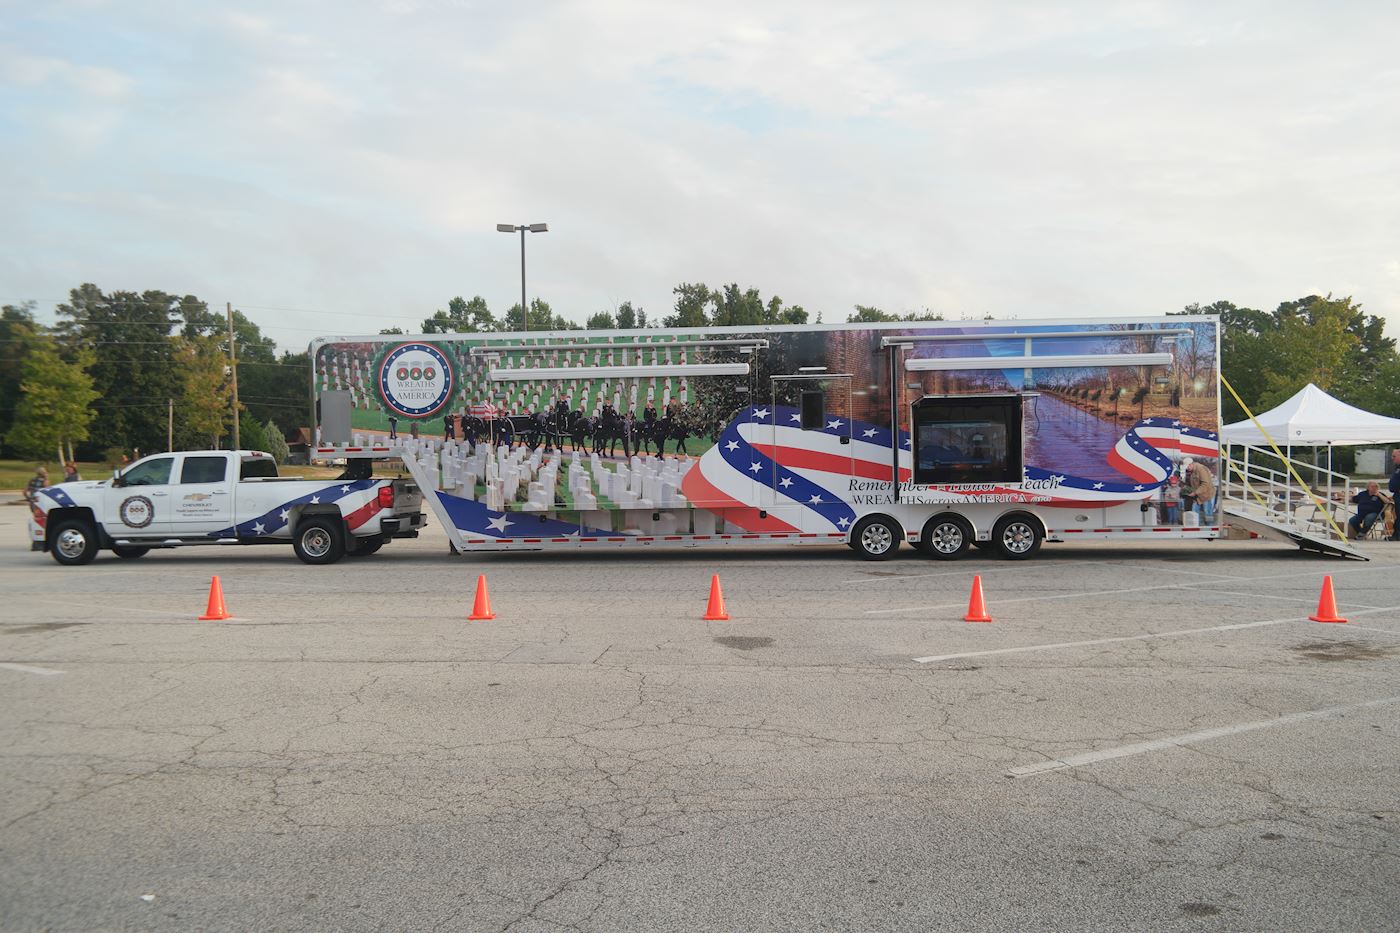 The Mobile Education Exhibit was setup at the beginning of the Wreaths of Honor Ride as well as at the Driver Appreciation event at Bennett's Home Office